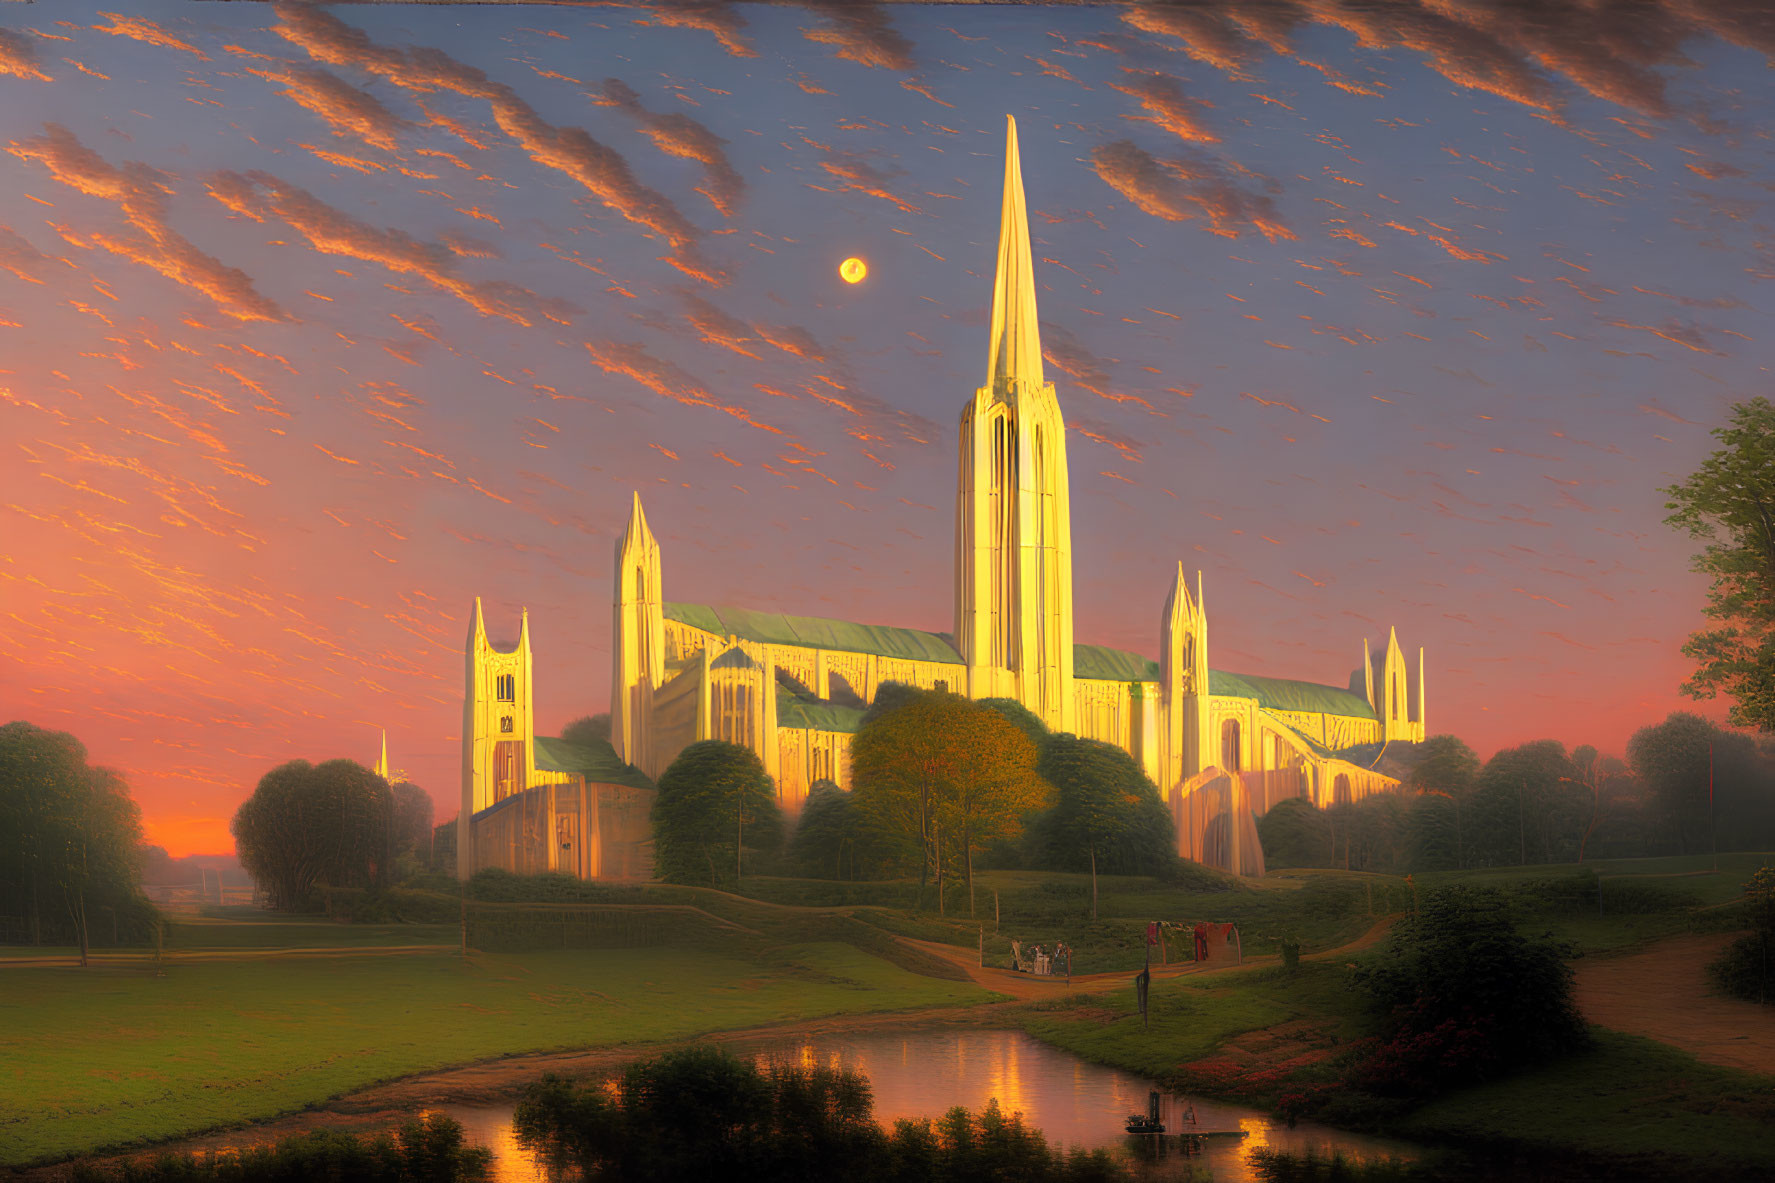 Majestic cathedral with tall spires at sunrise by serene river